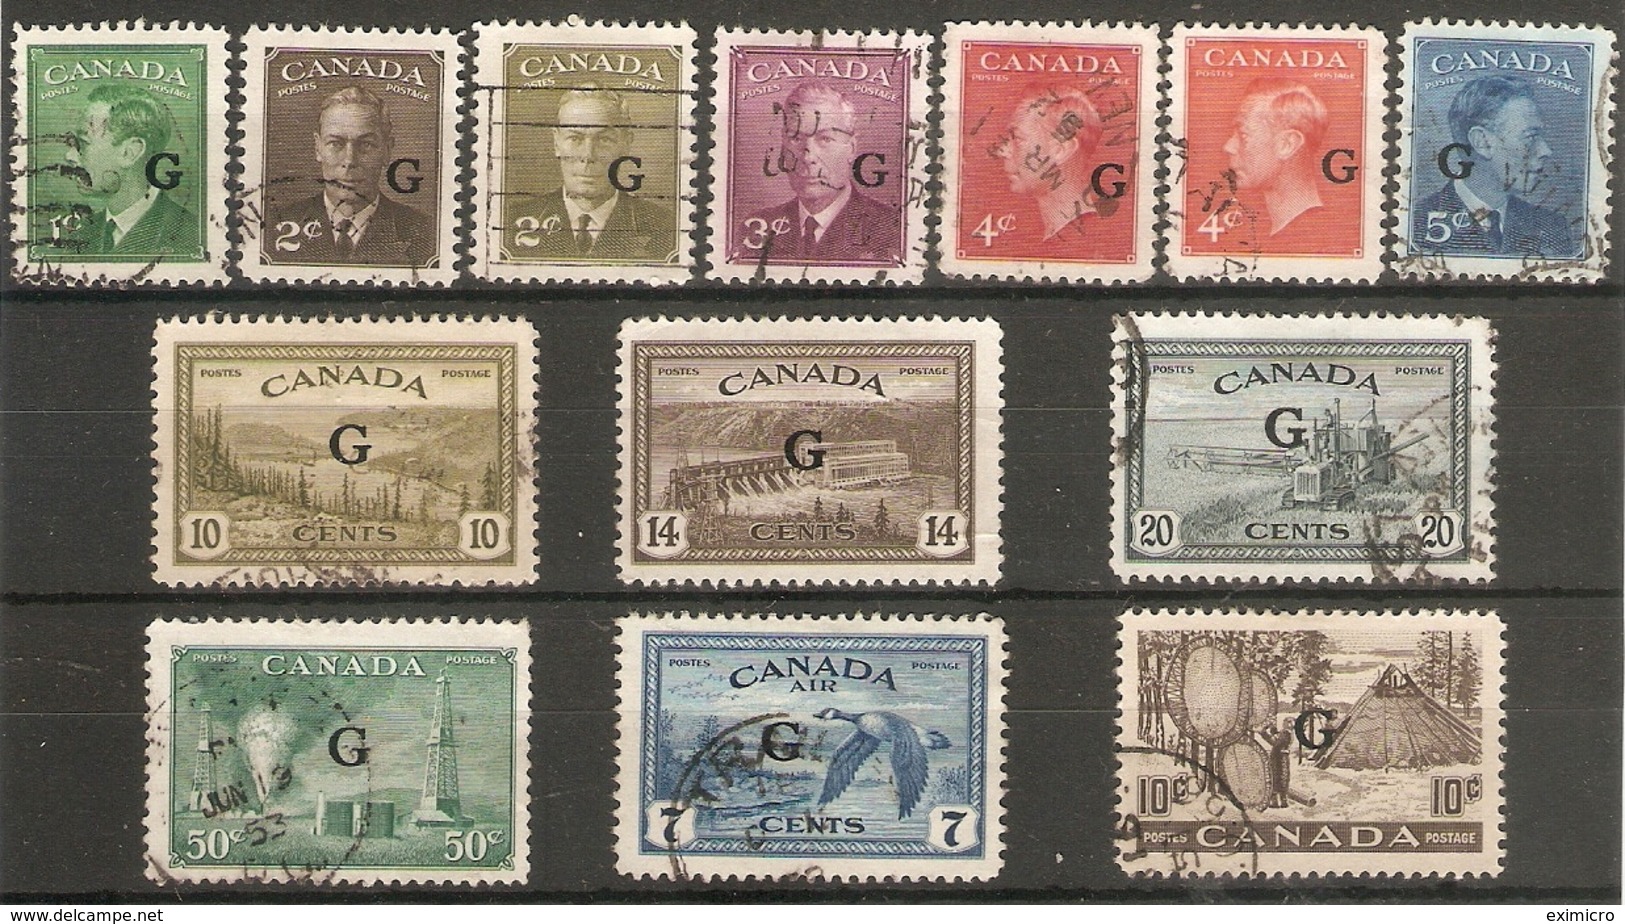 CANADA 1949  'G'. OFFICIALS BETWEEN SG O178 AND SG O191 FINE USED Cat £75+ - Surchargés